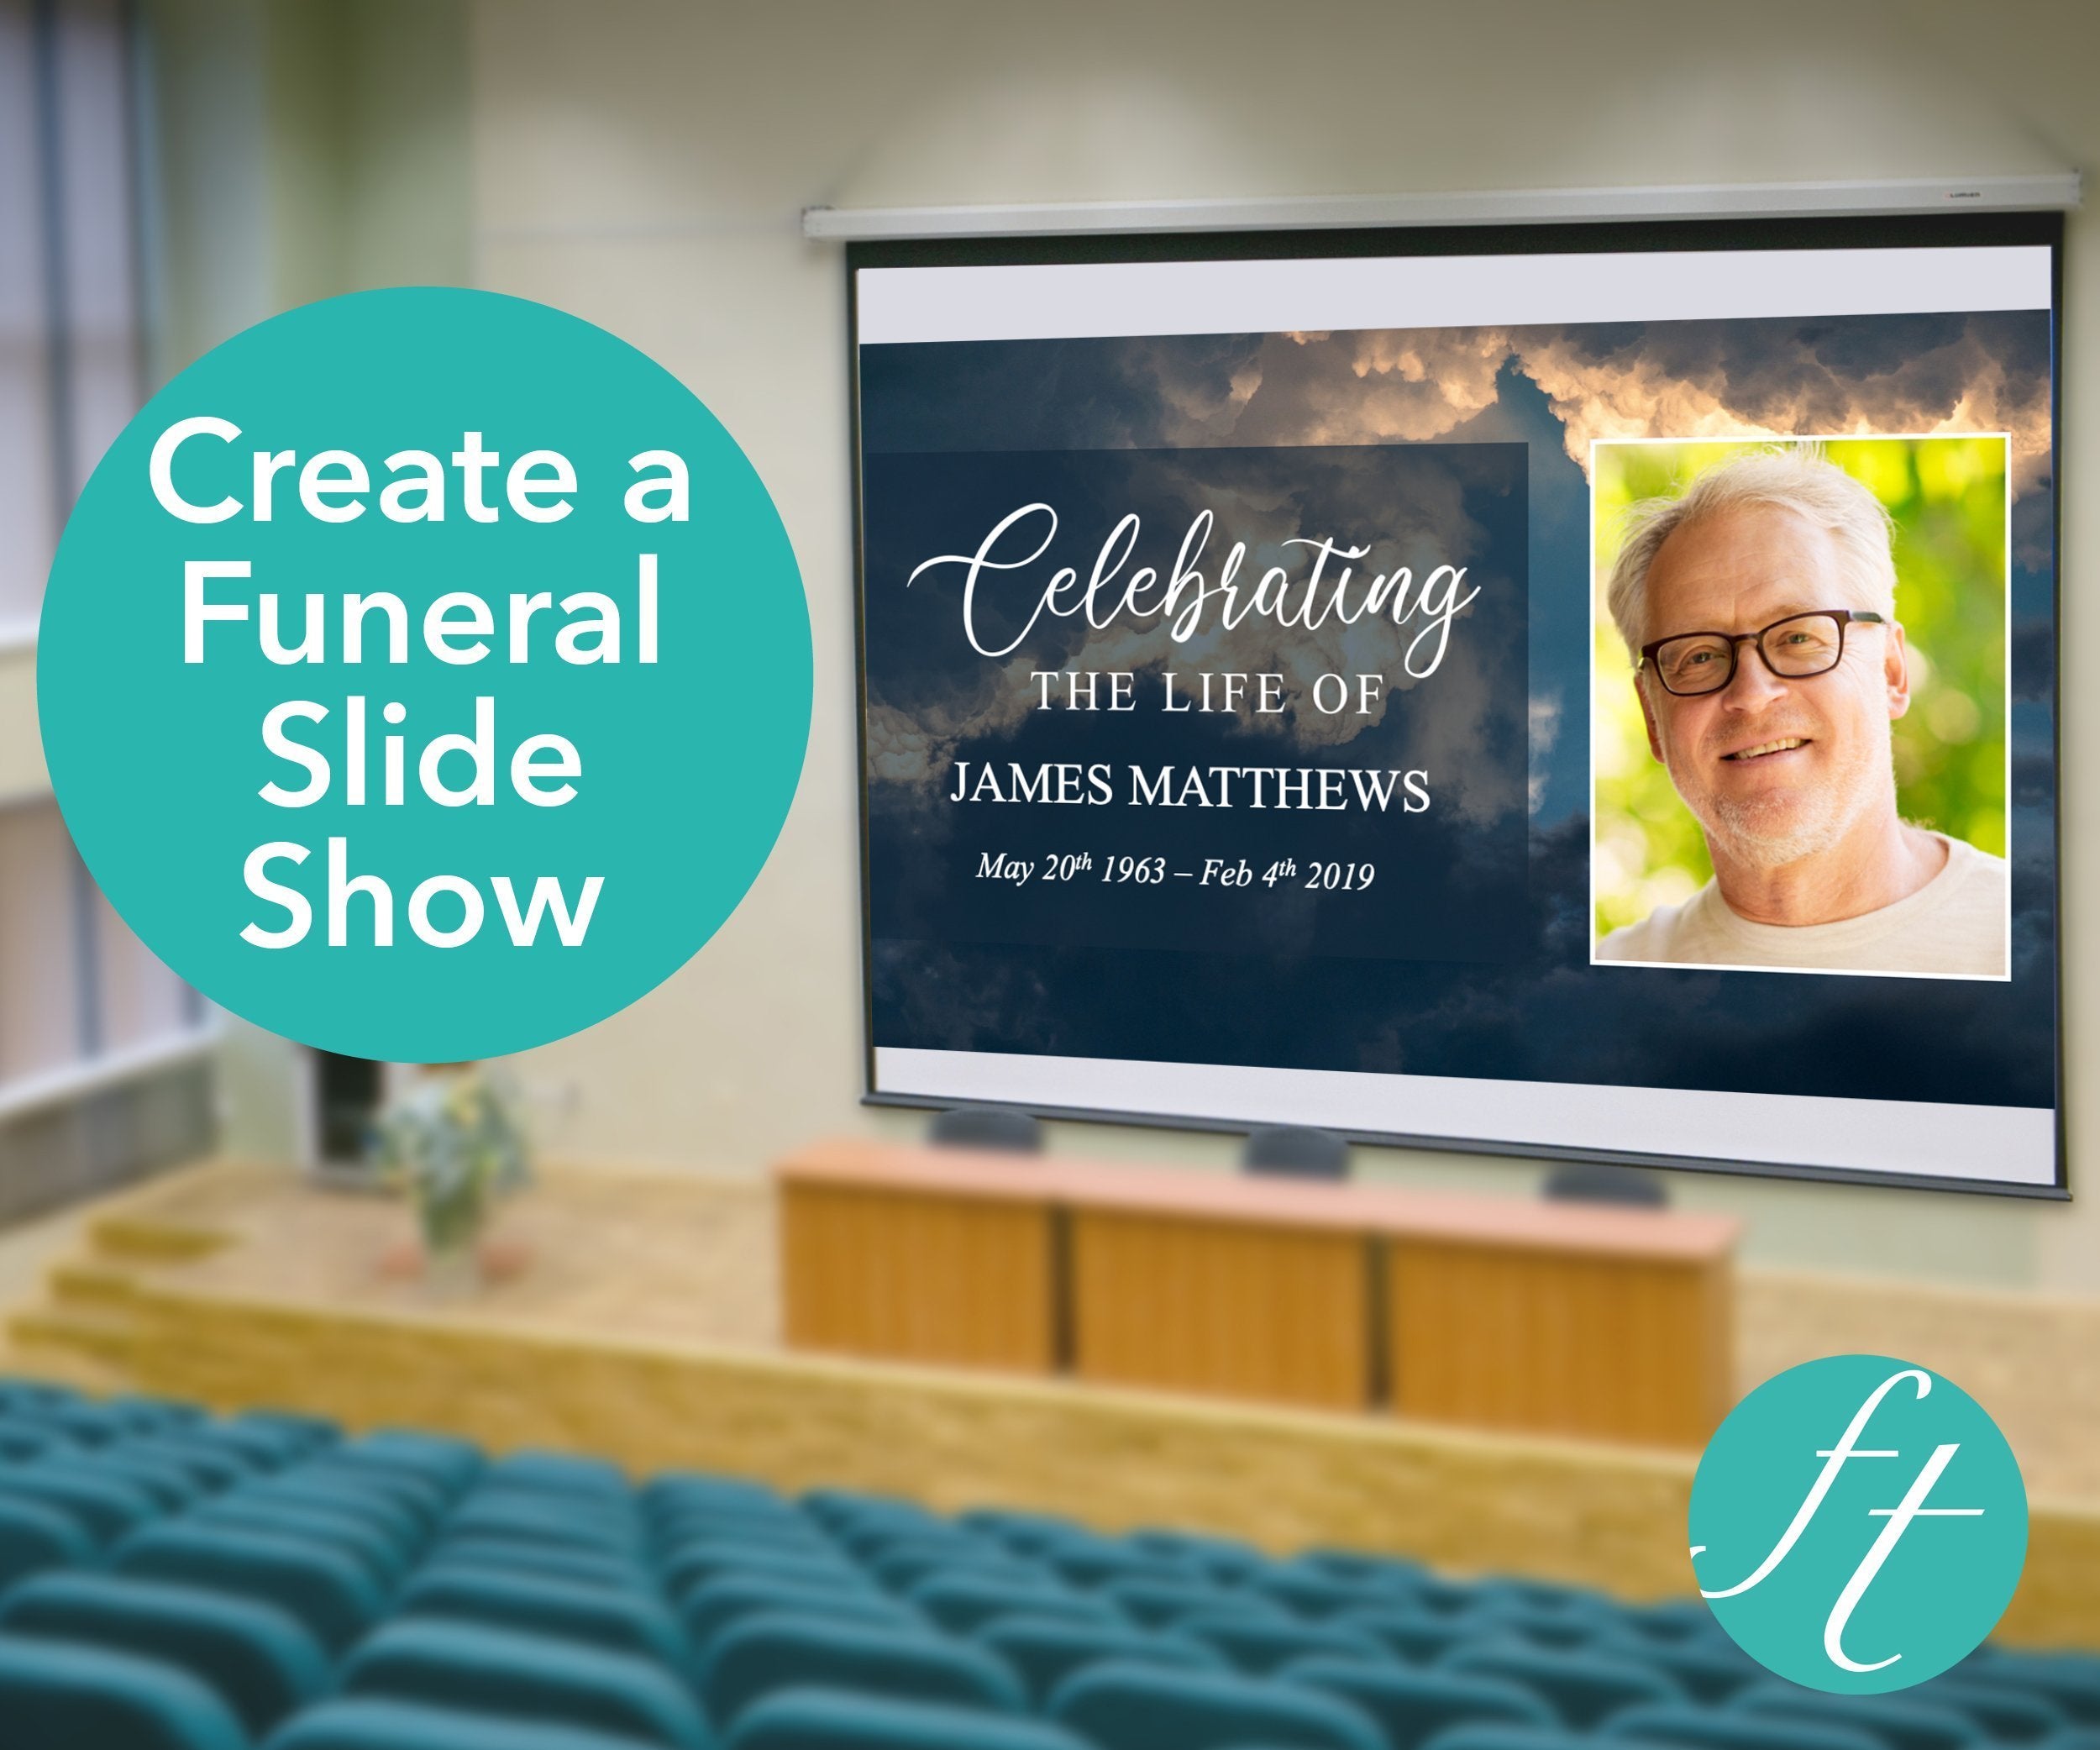 funeral powerpoint templates